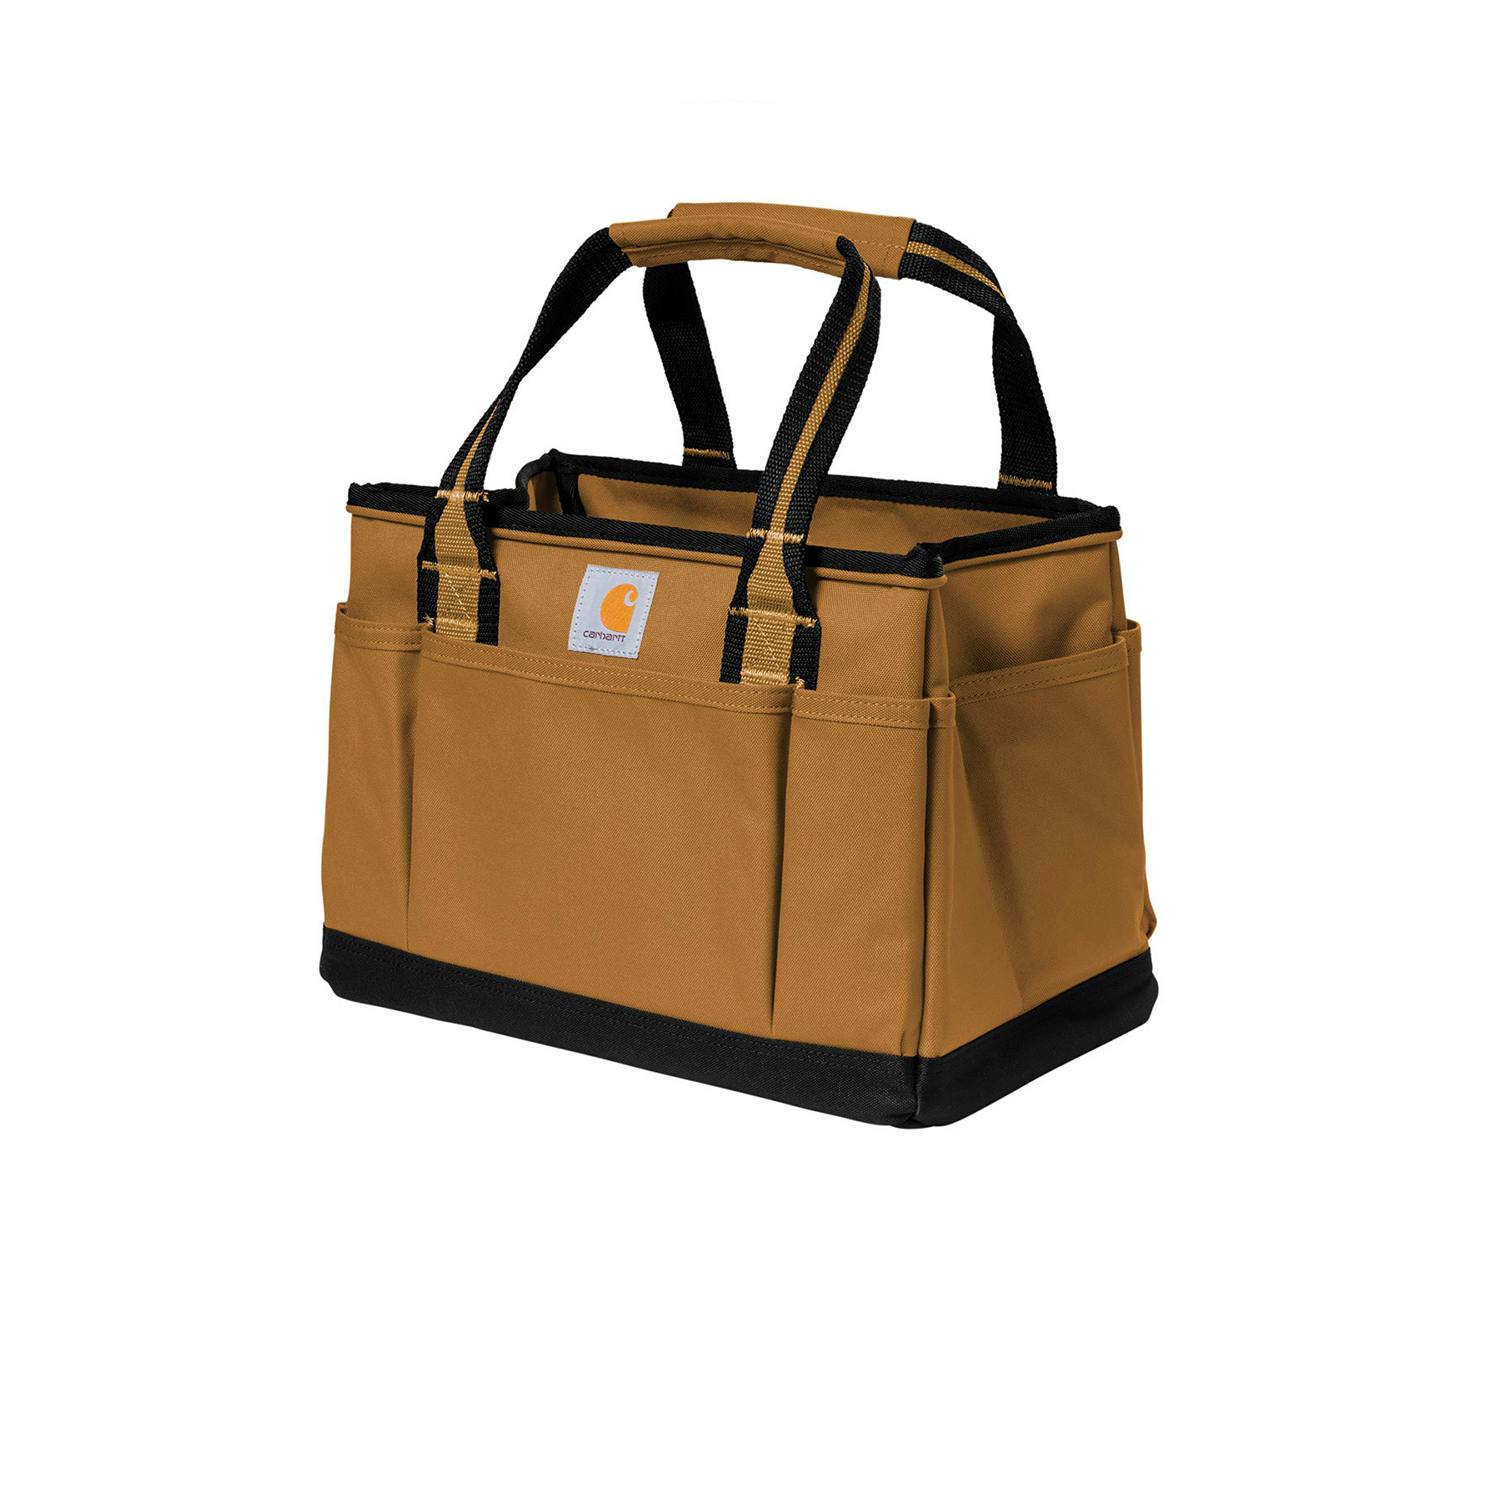 Carhartt Utility Tote Bag - additional Image 2